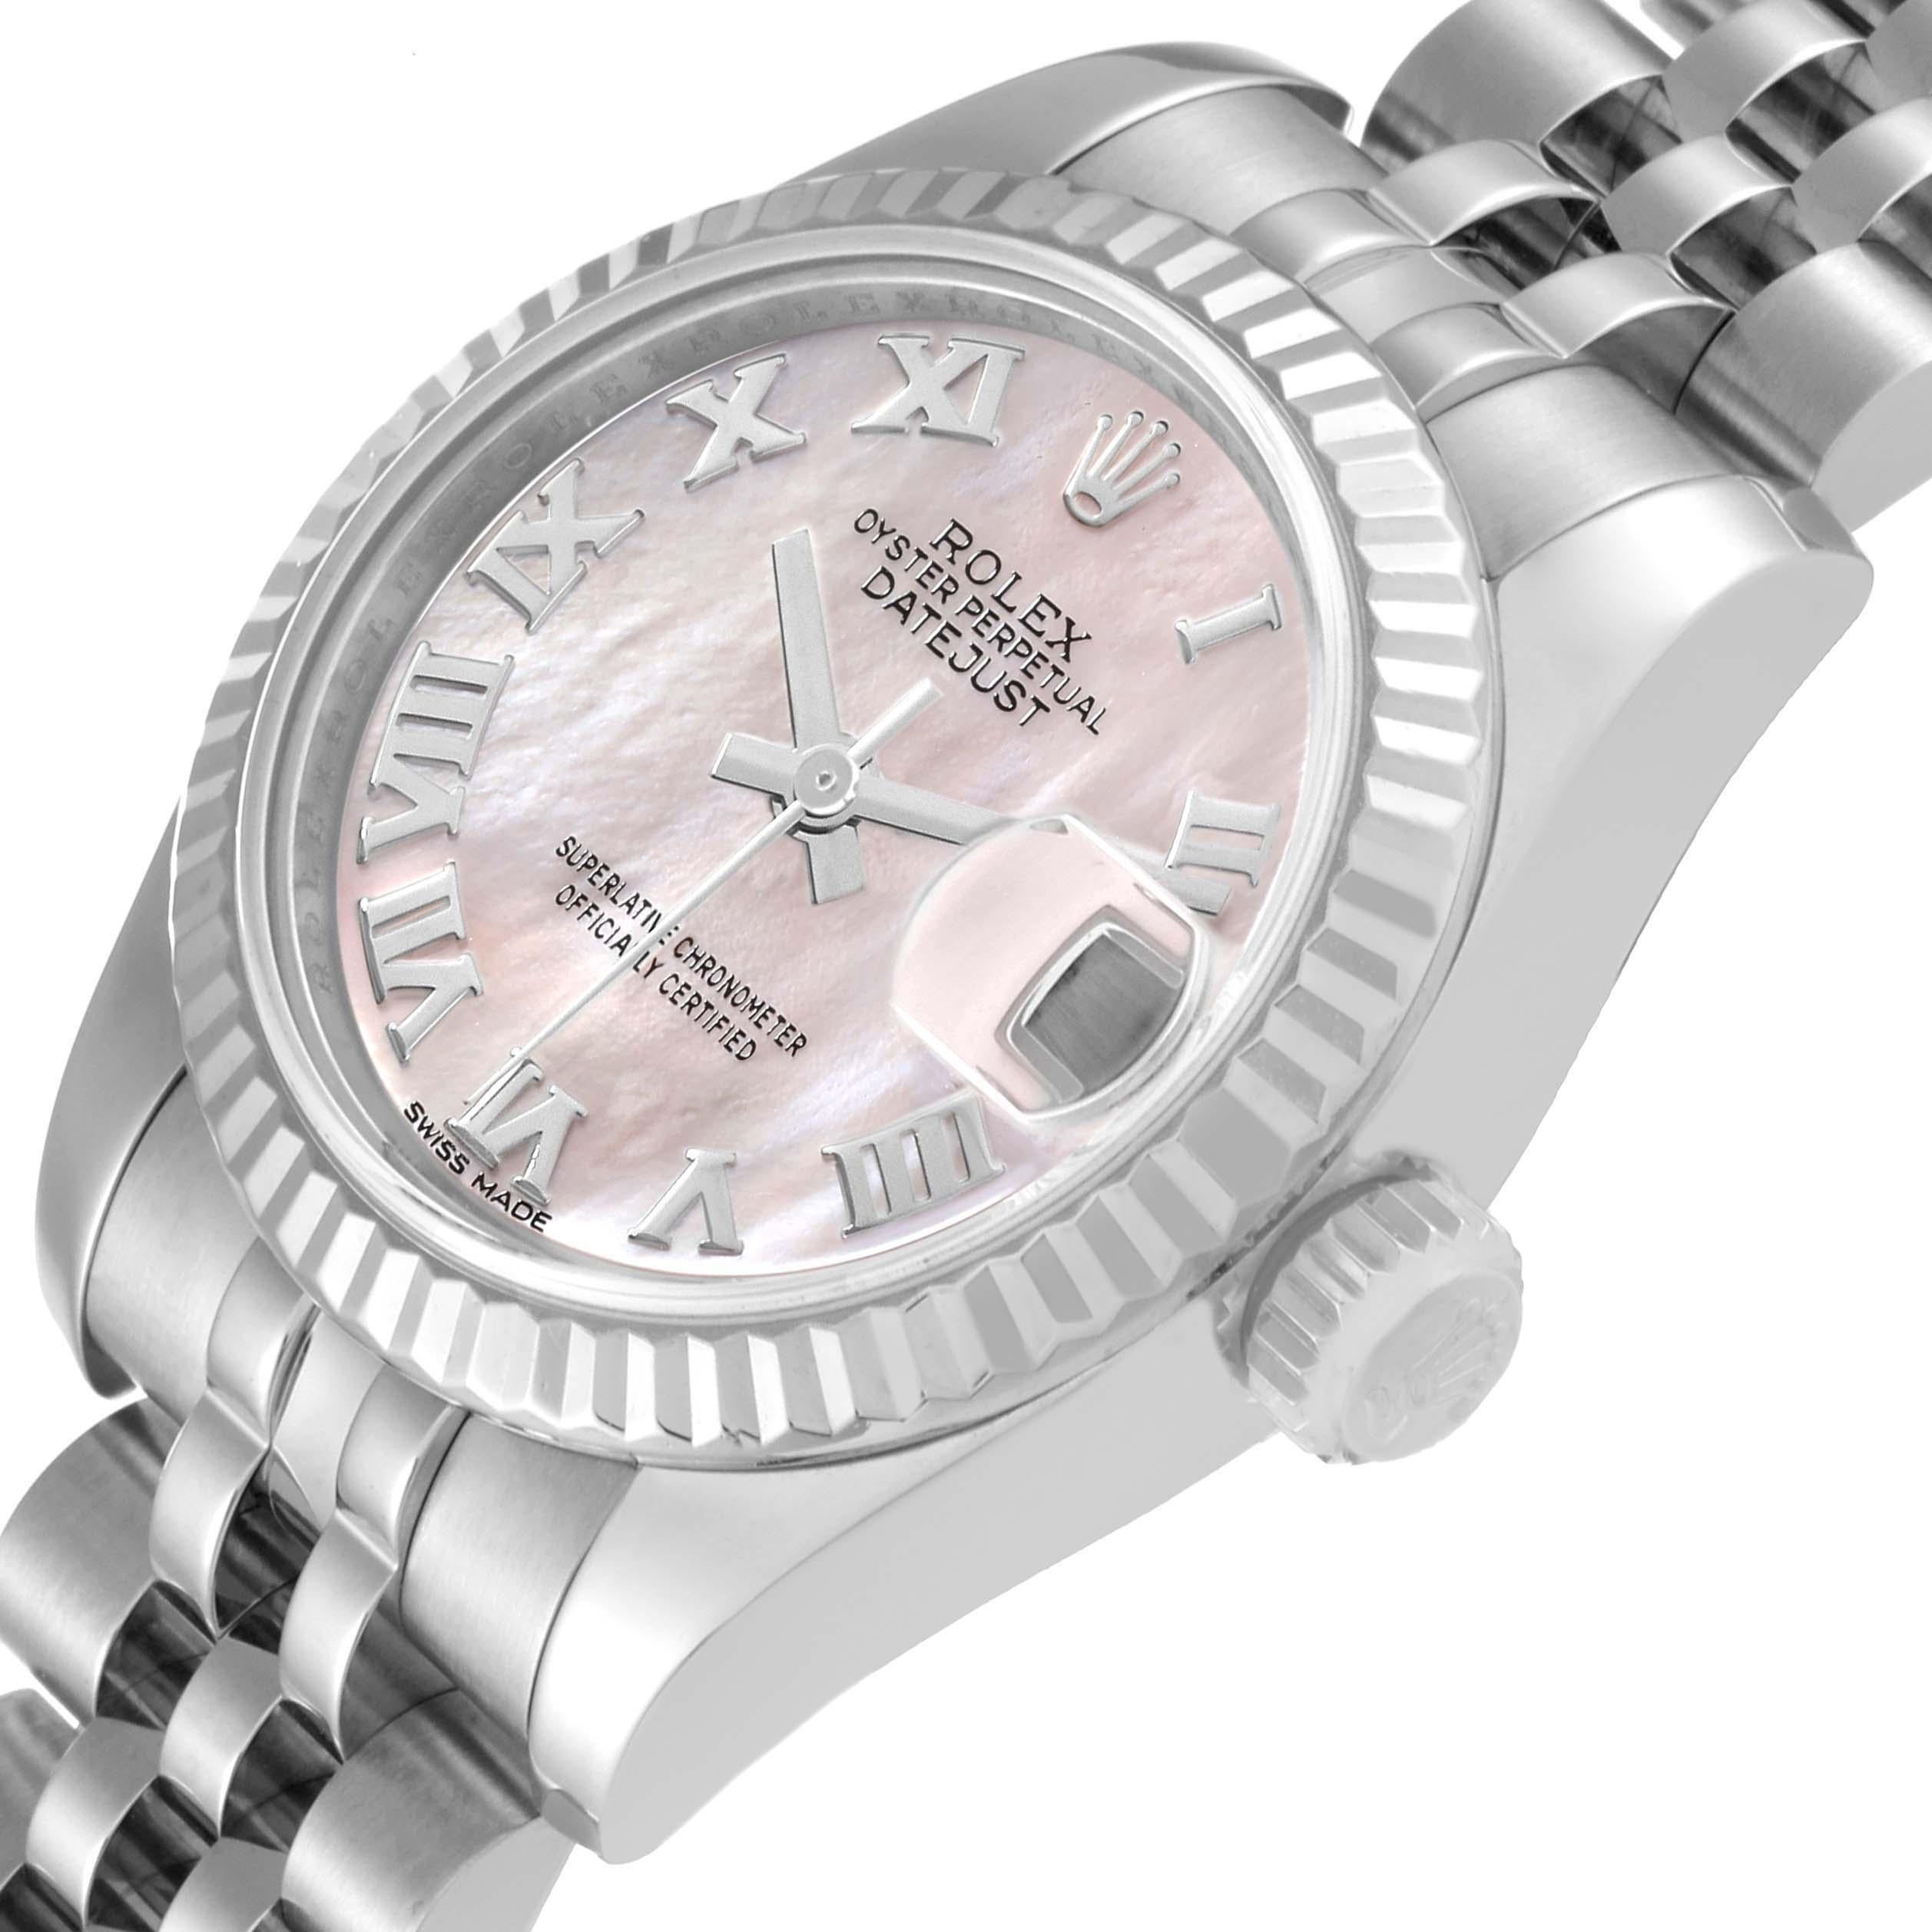 Rolex Datejust Steel White Gold Mother of Pearl Dial Ladies Watch 179174 1